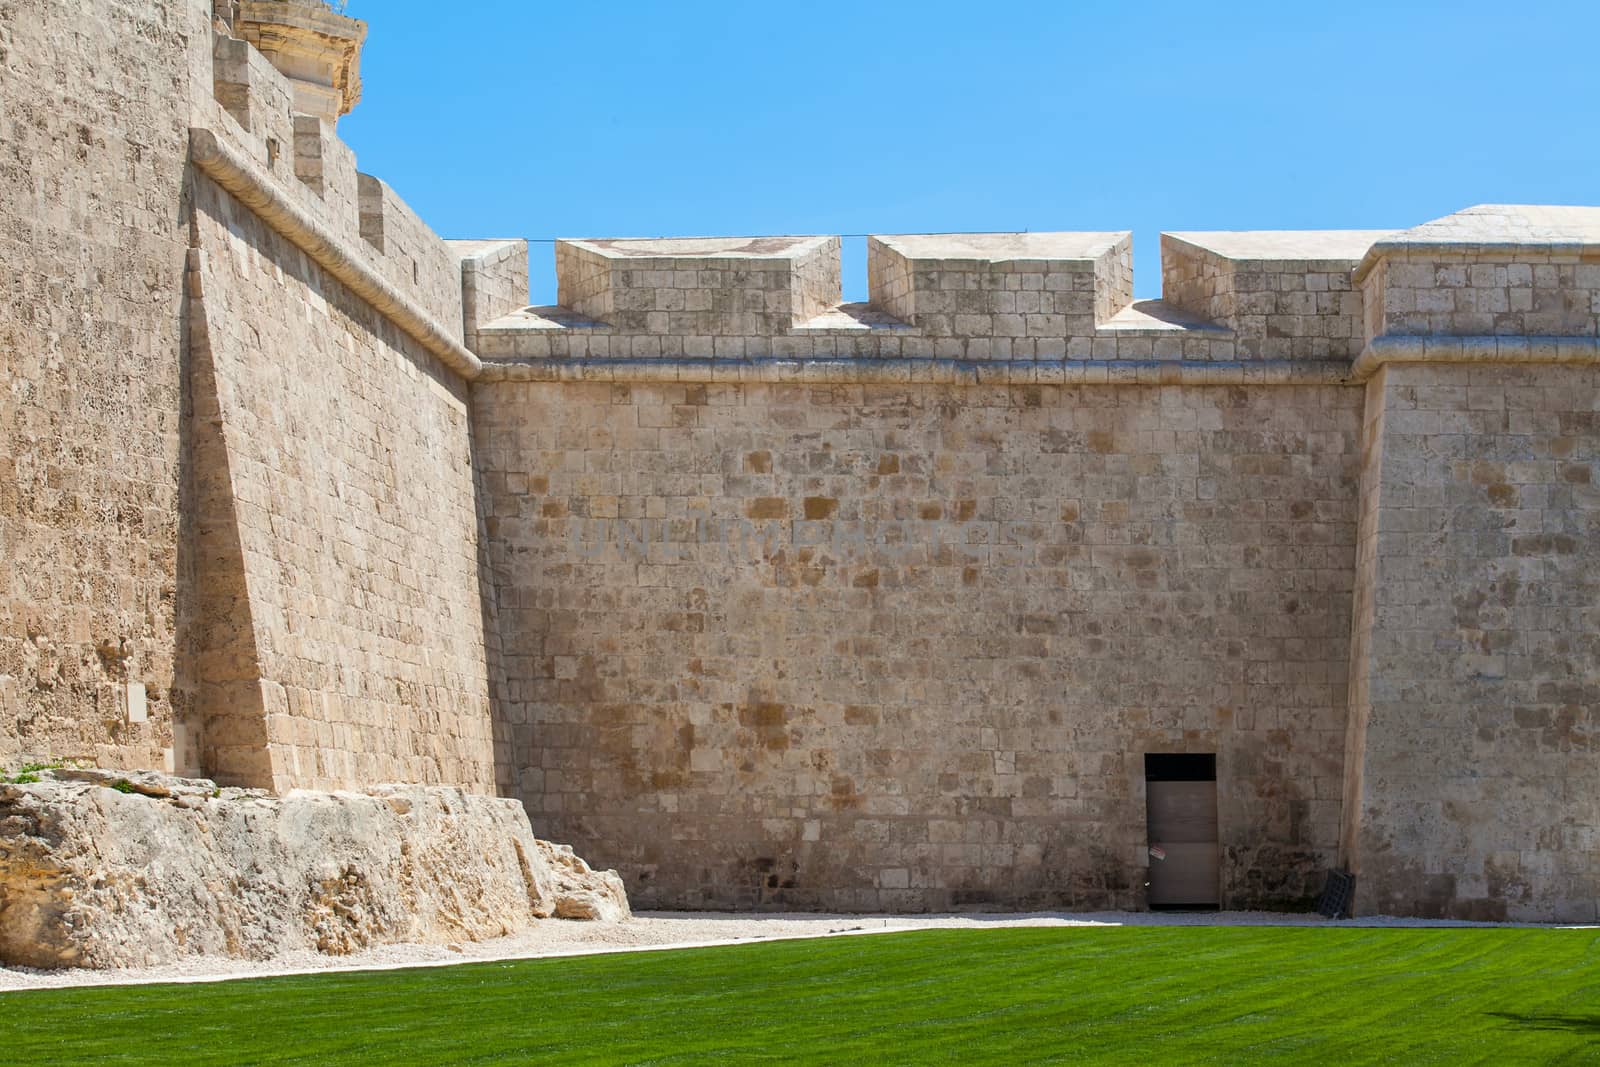 The newly restored bastion walls surrounding the medieval city of Mdina in Malta